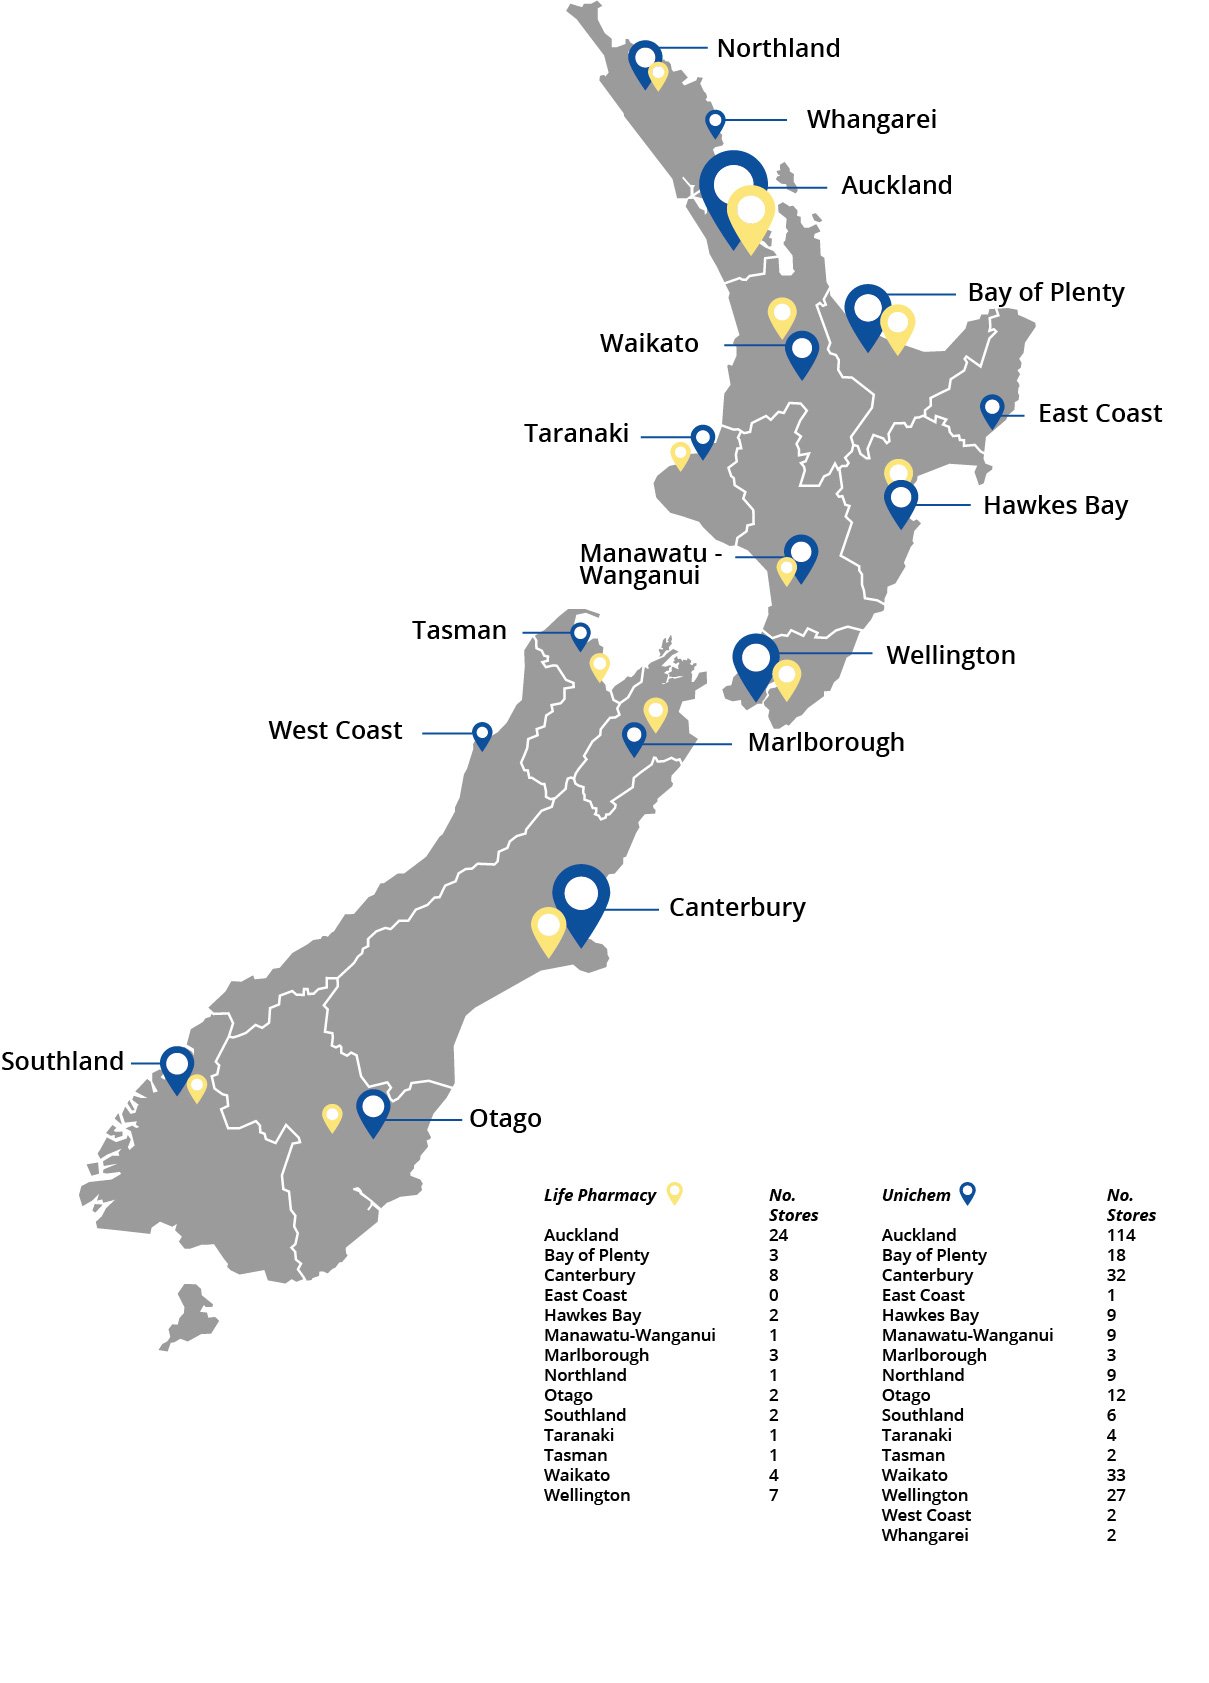 04791 - New Zealand Map Infographic_poster.jpg